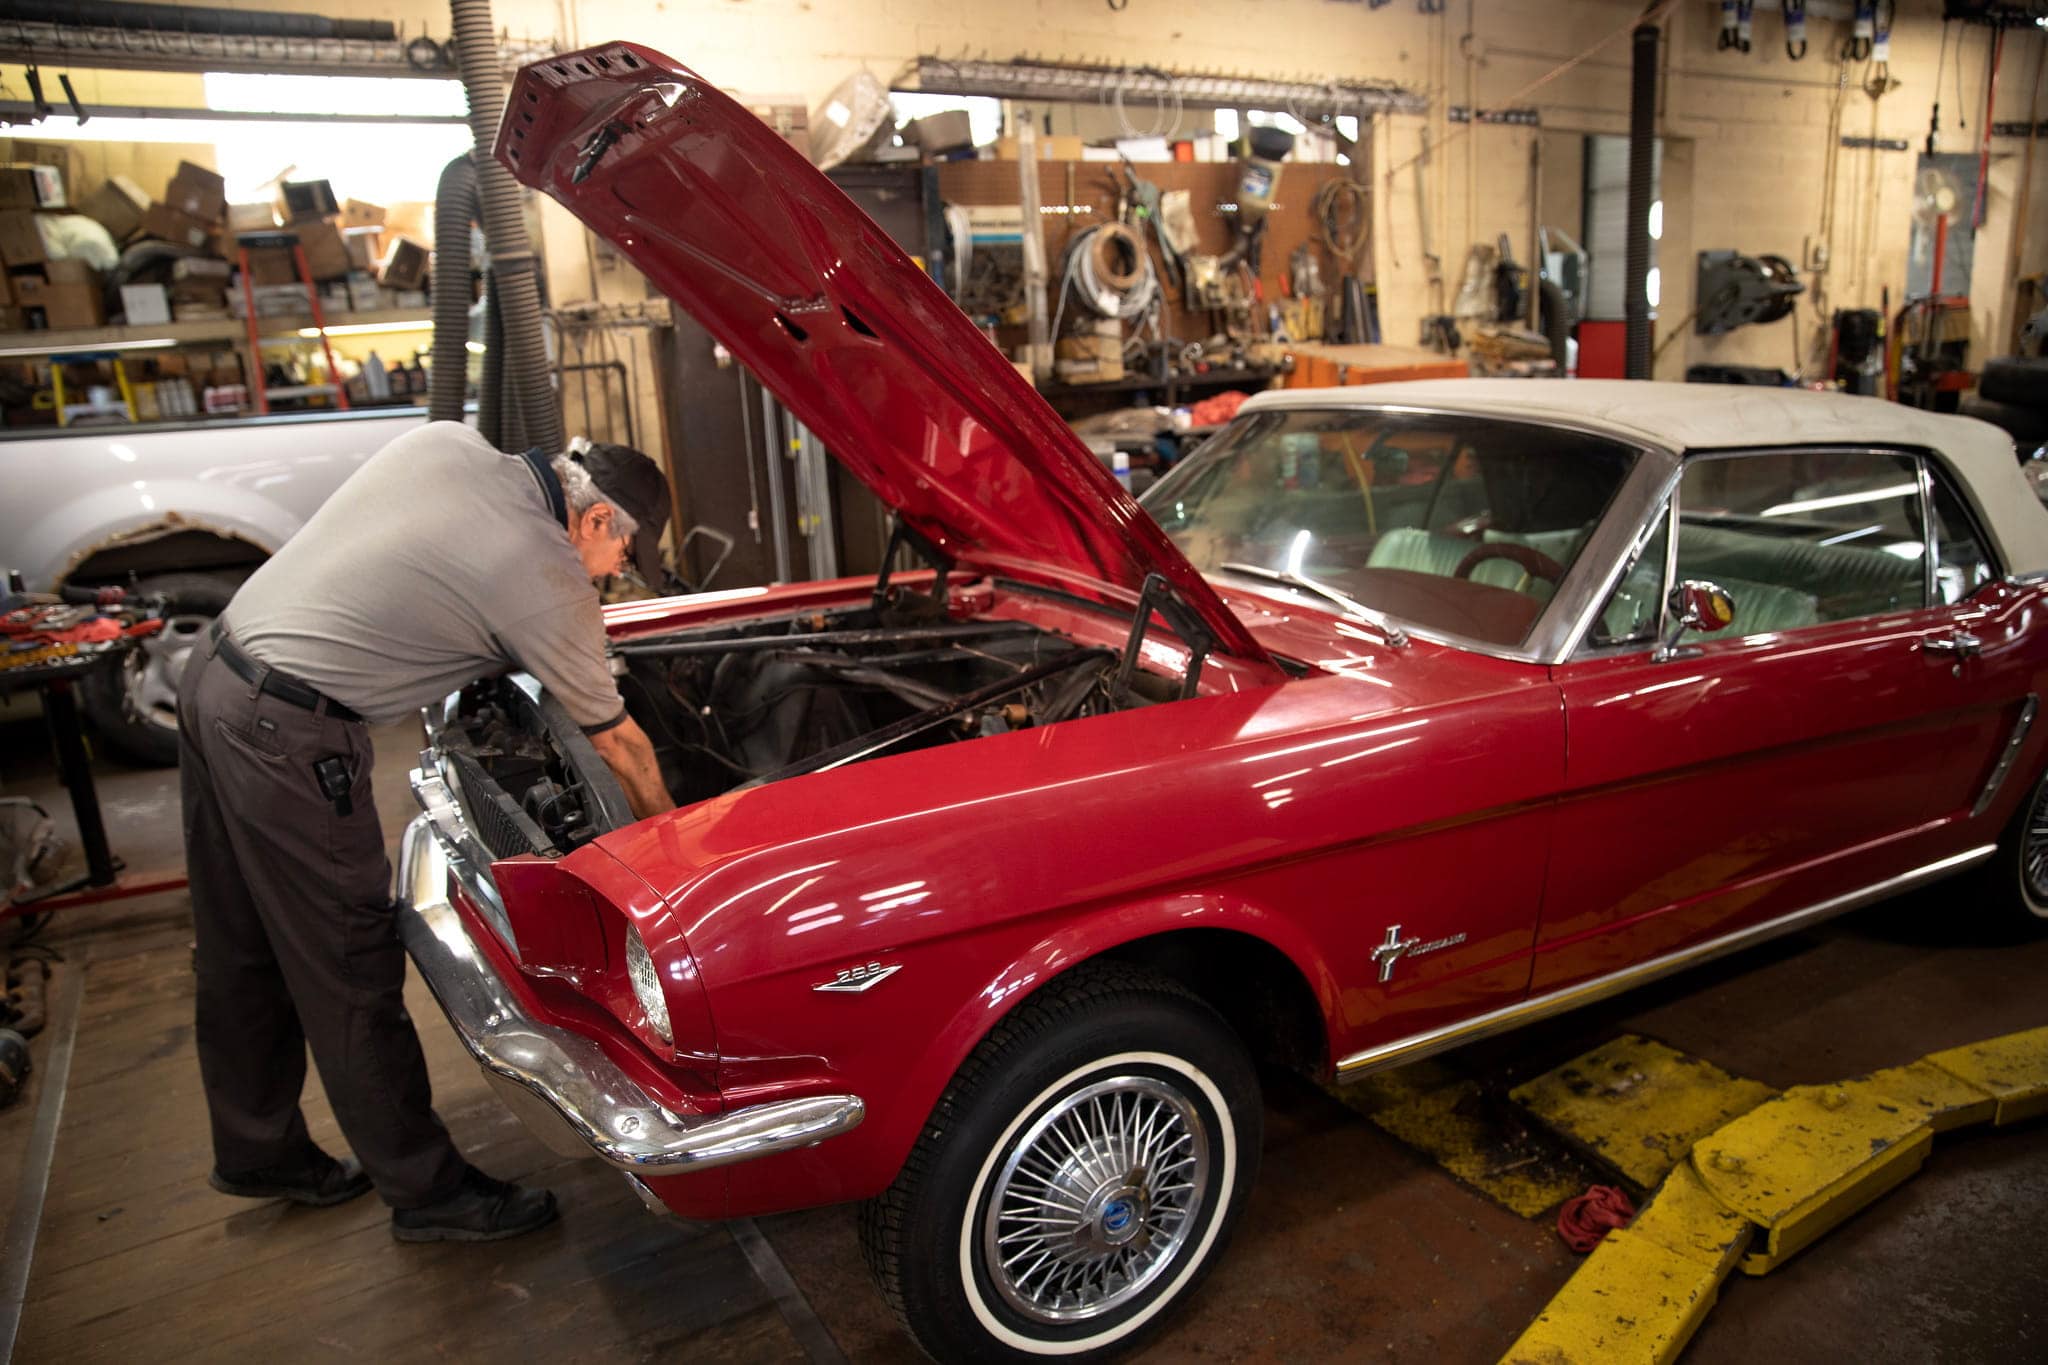 An elderly man leans over the hood of a cherry red Mustang